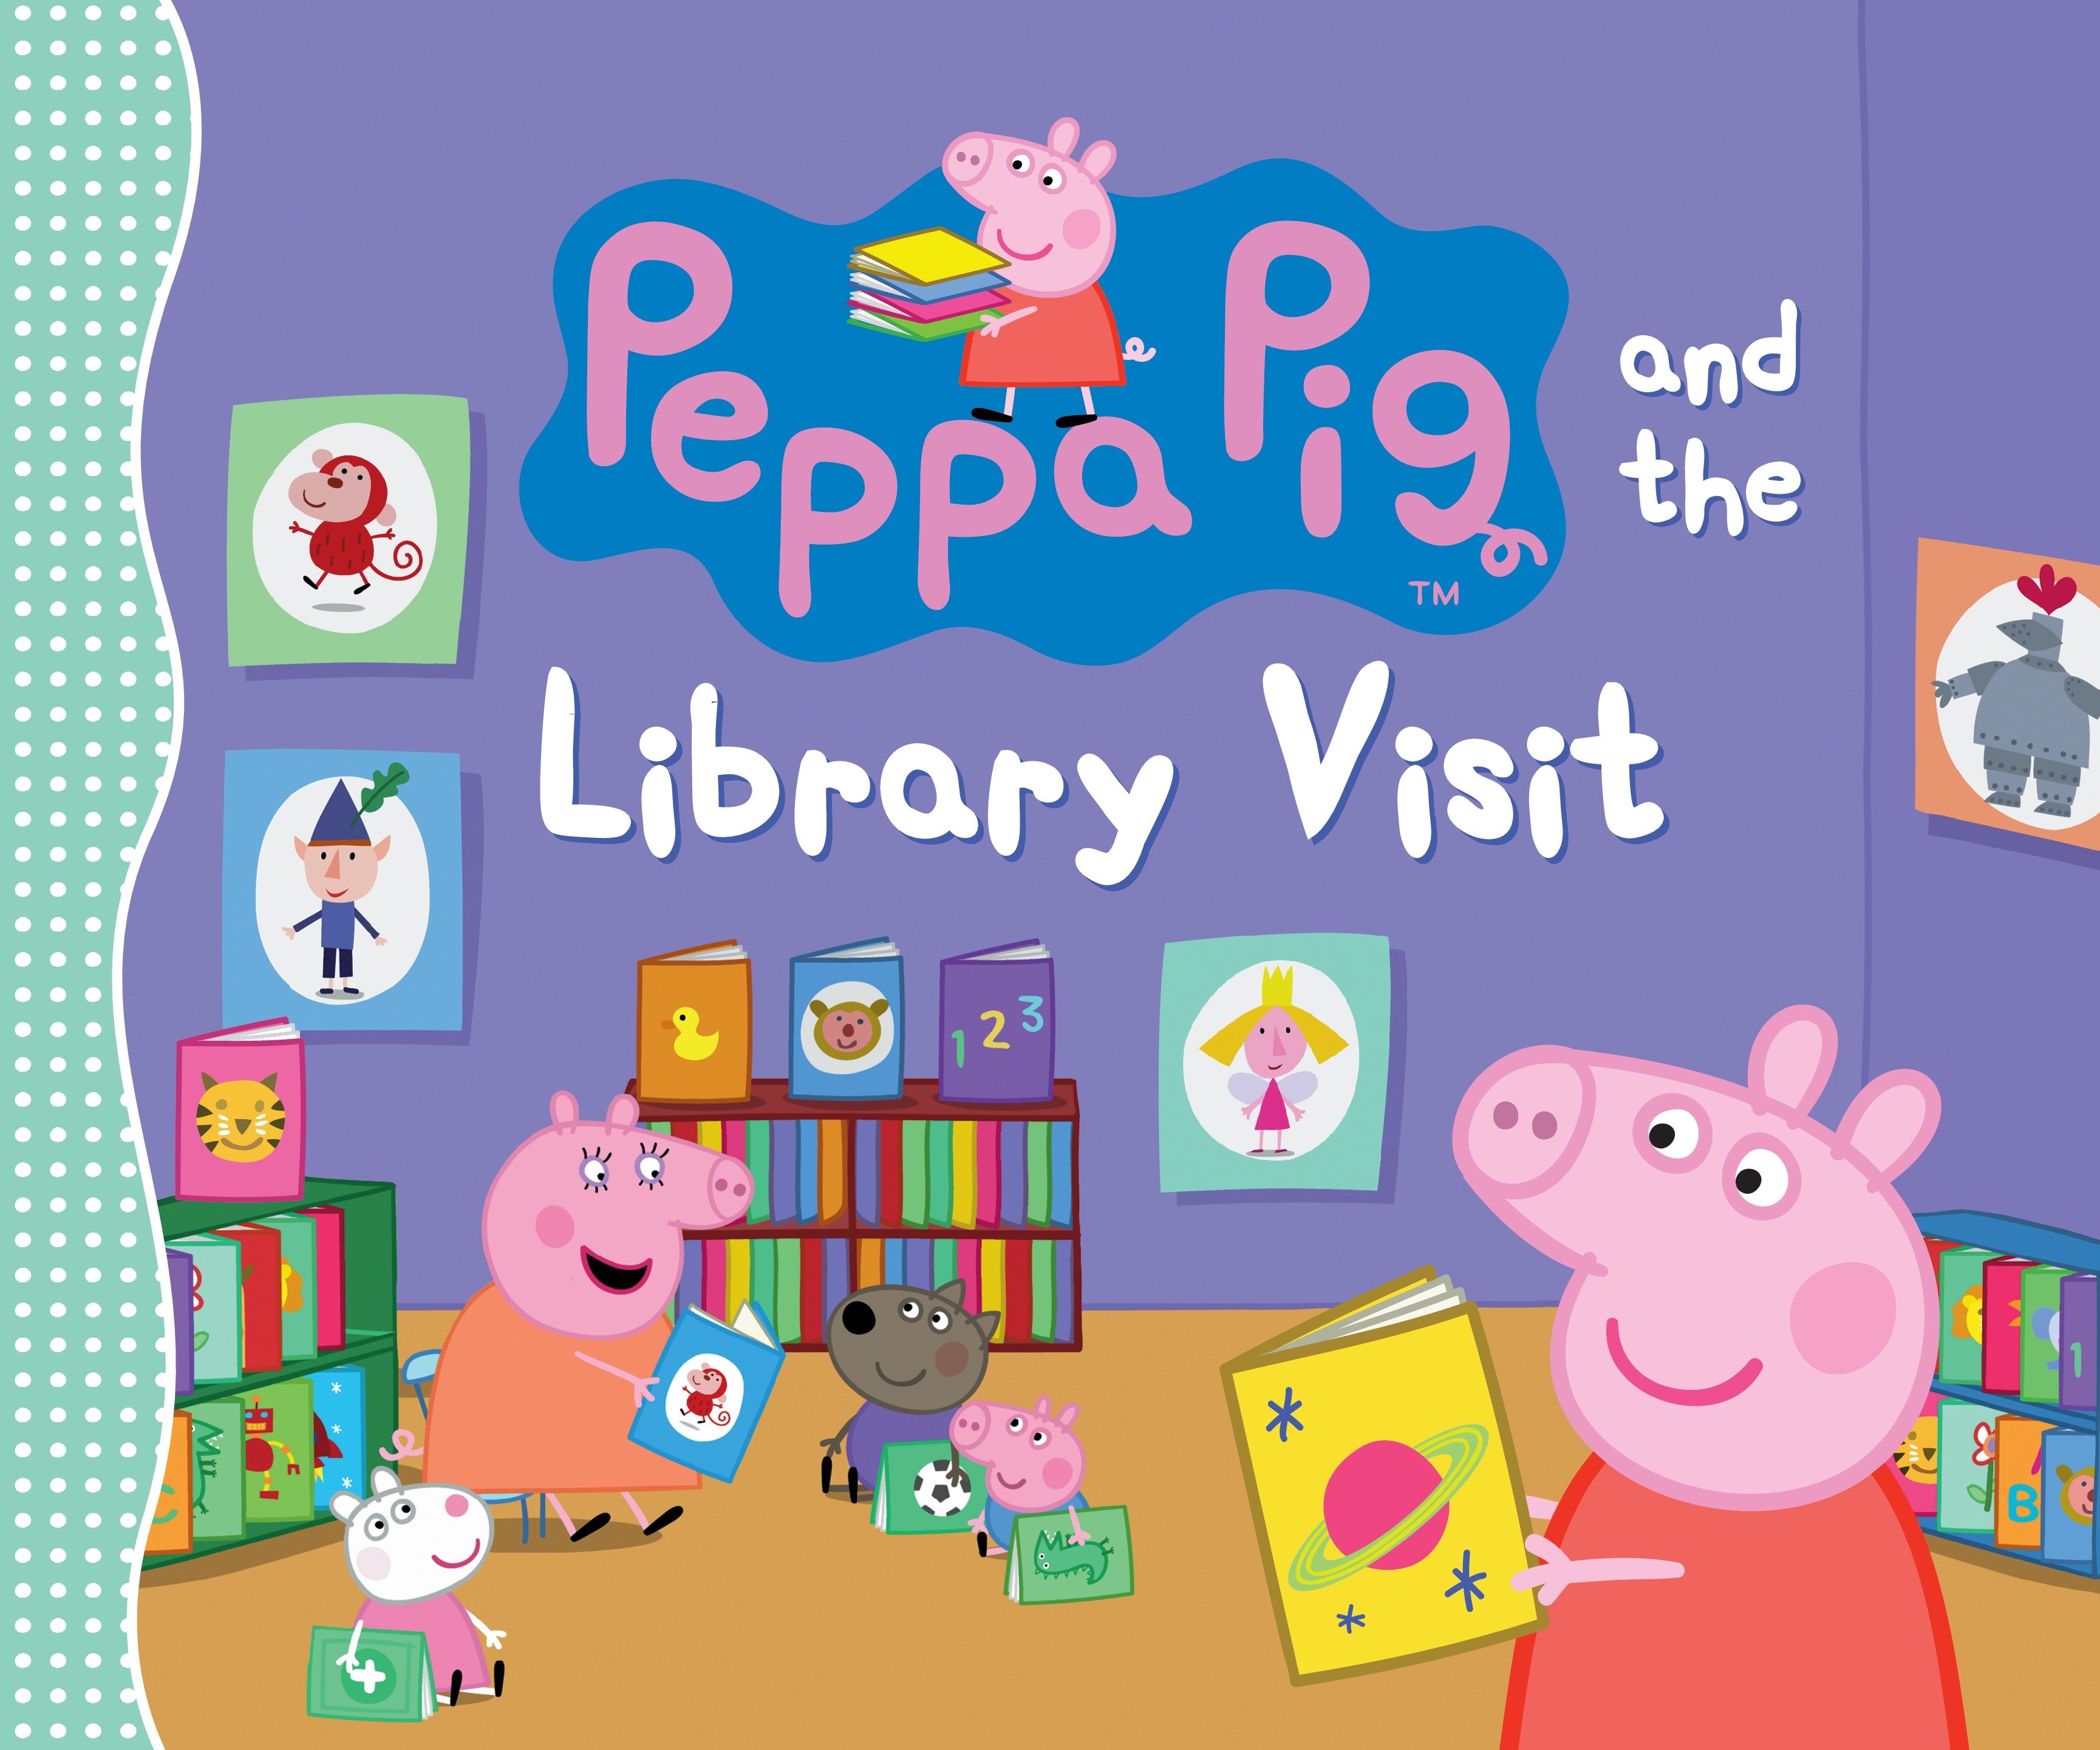 Peppa Pig and the Library Visit (Hardcover Book)